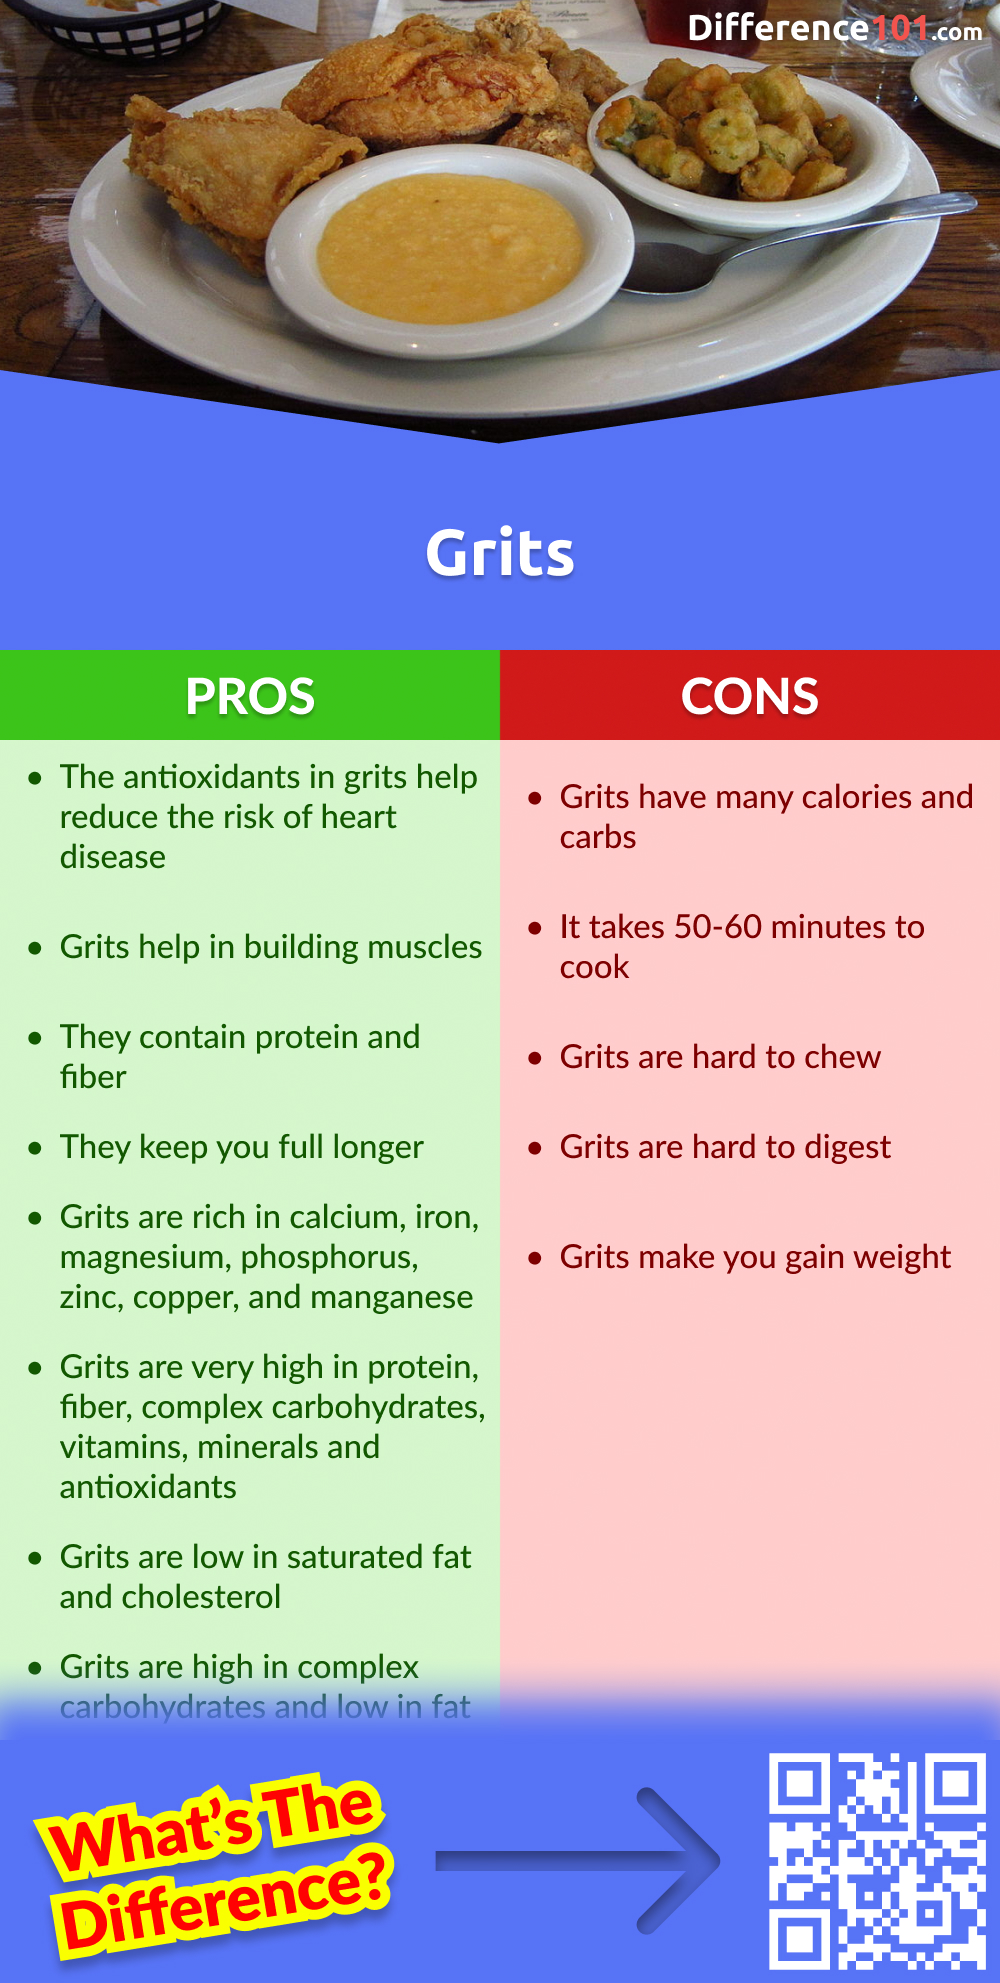 Grits Pros & Cons